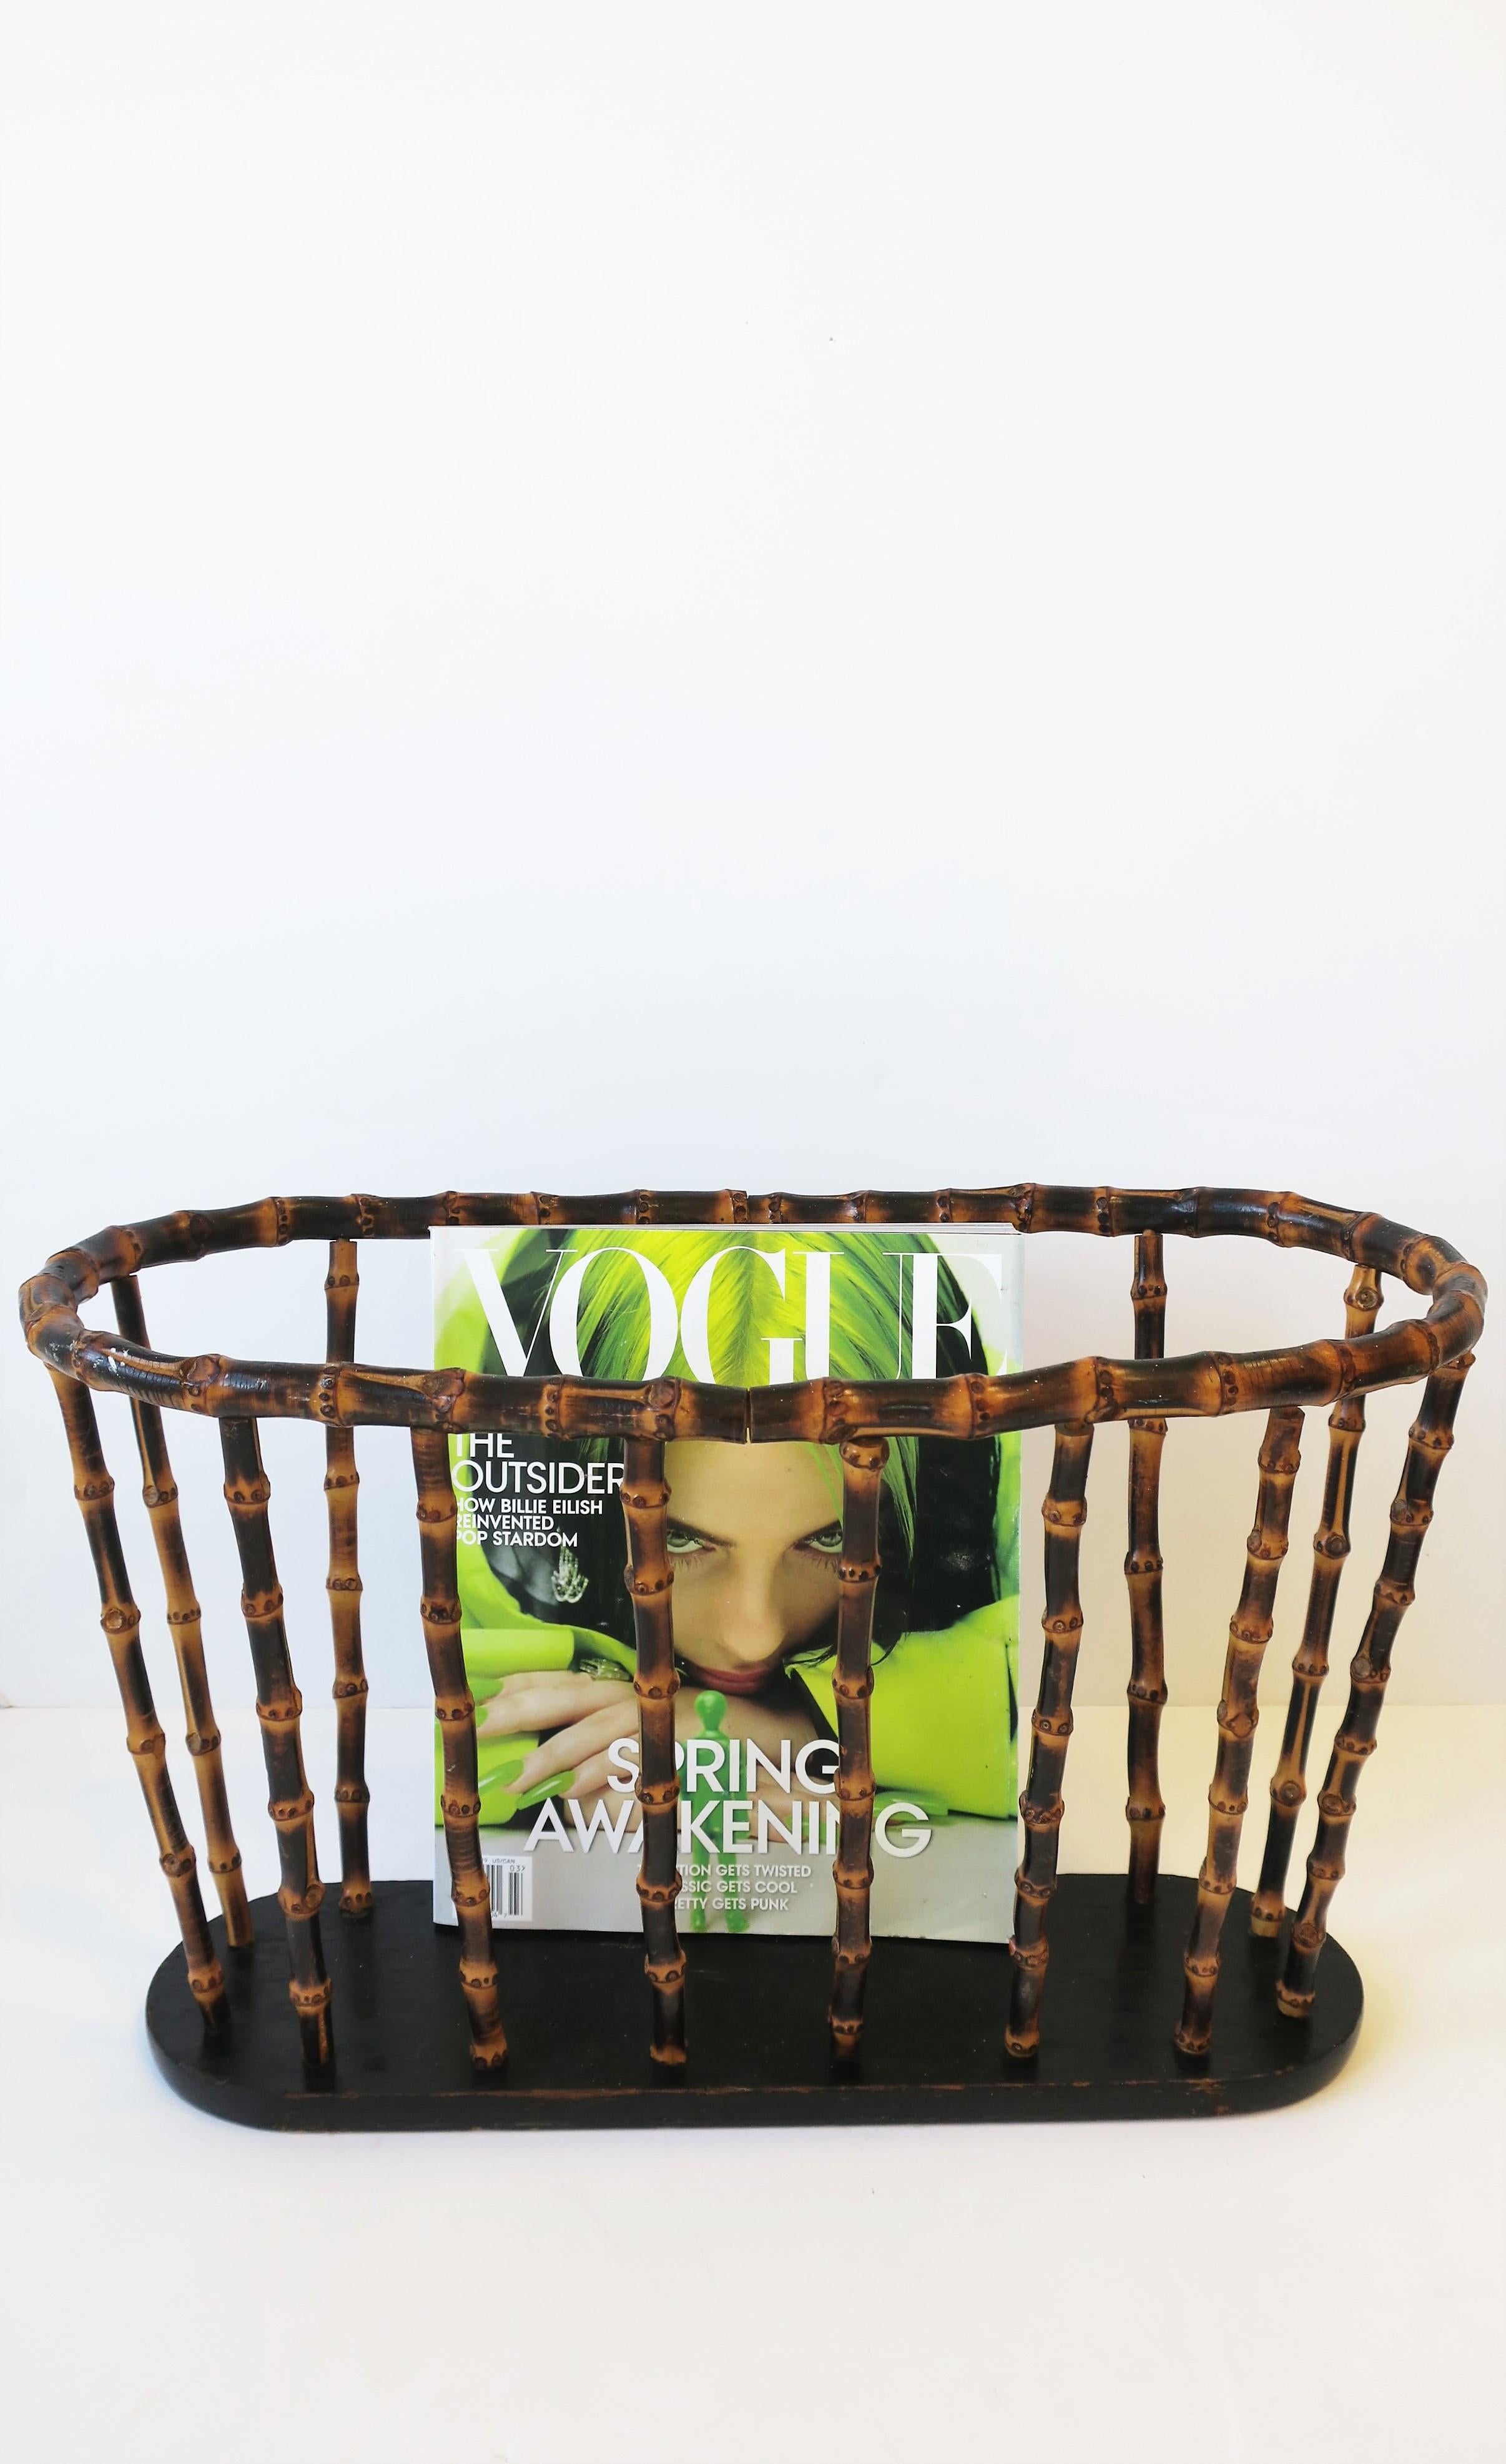 20th Century Bamboo Magazine or Newspaper Holder Stand Rack Basket in the style of Gucci